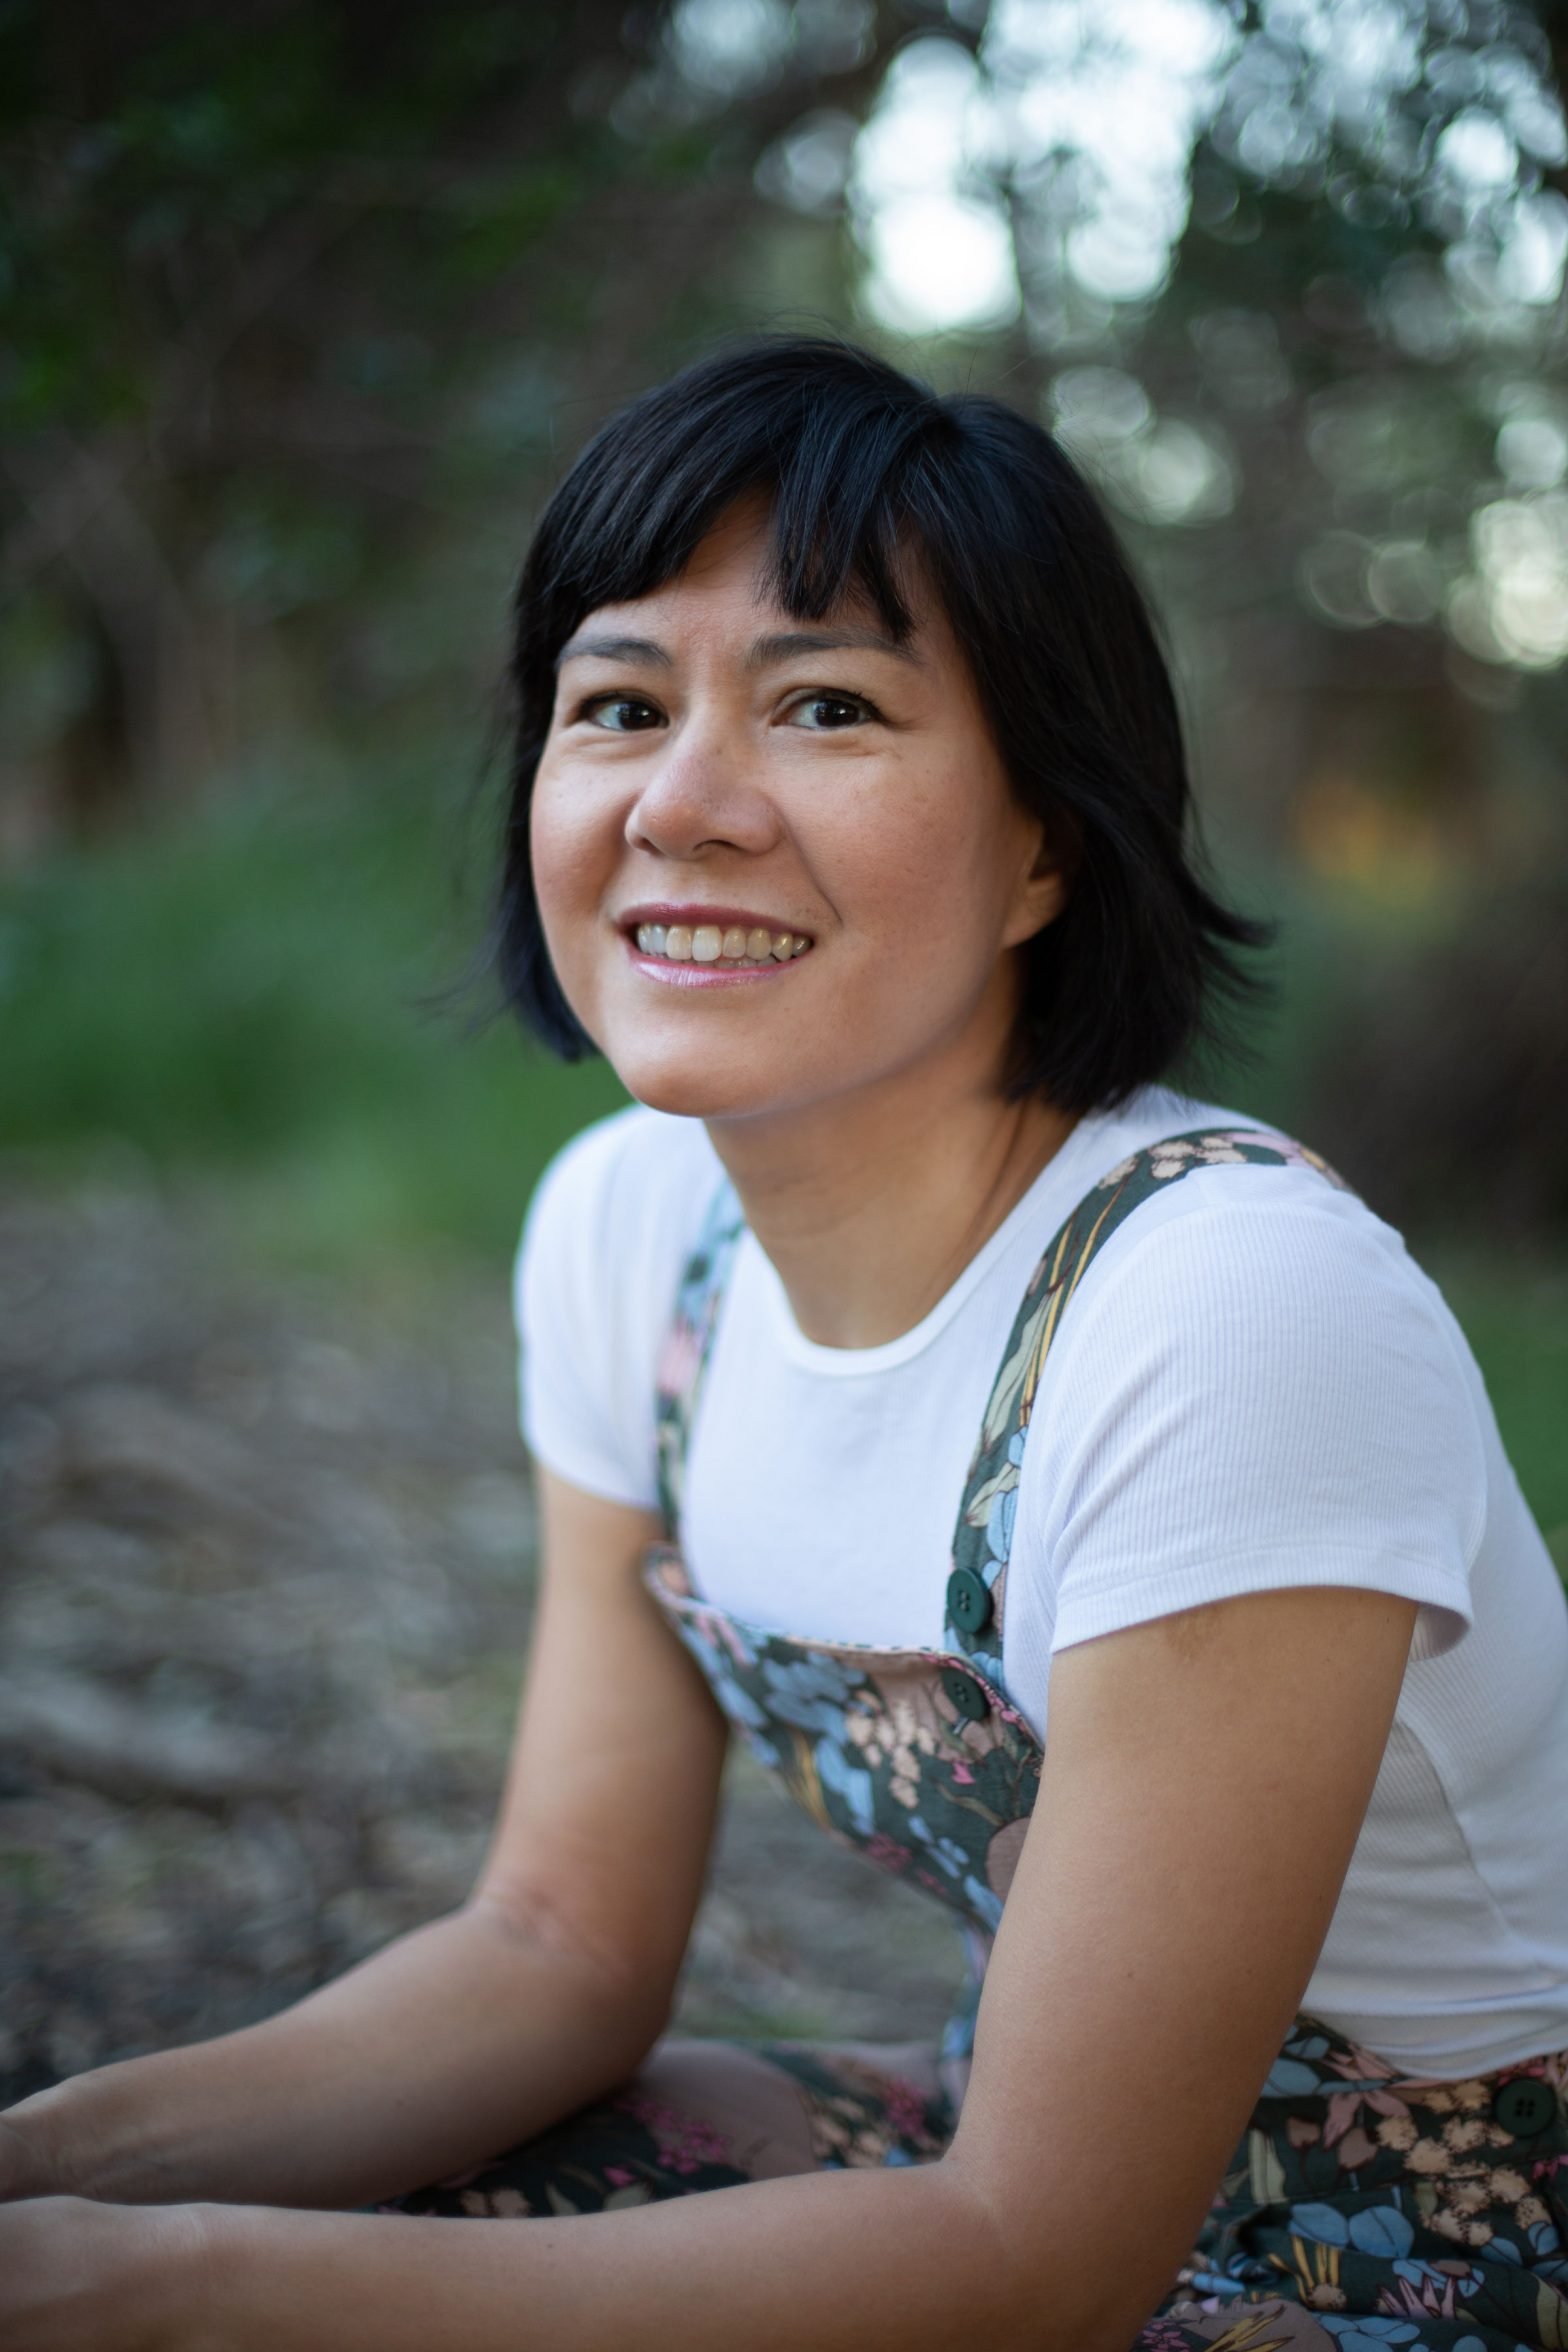 Photo of a woman with short black hair outdoors